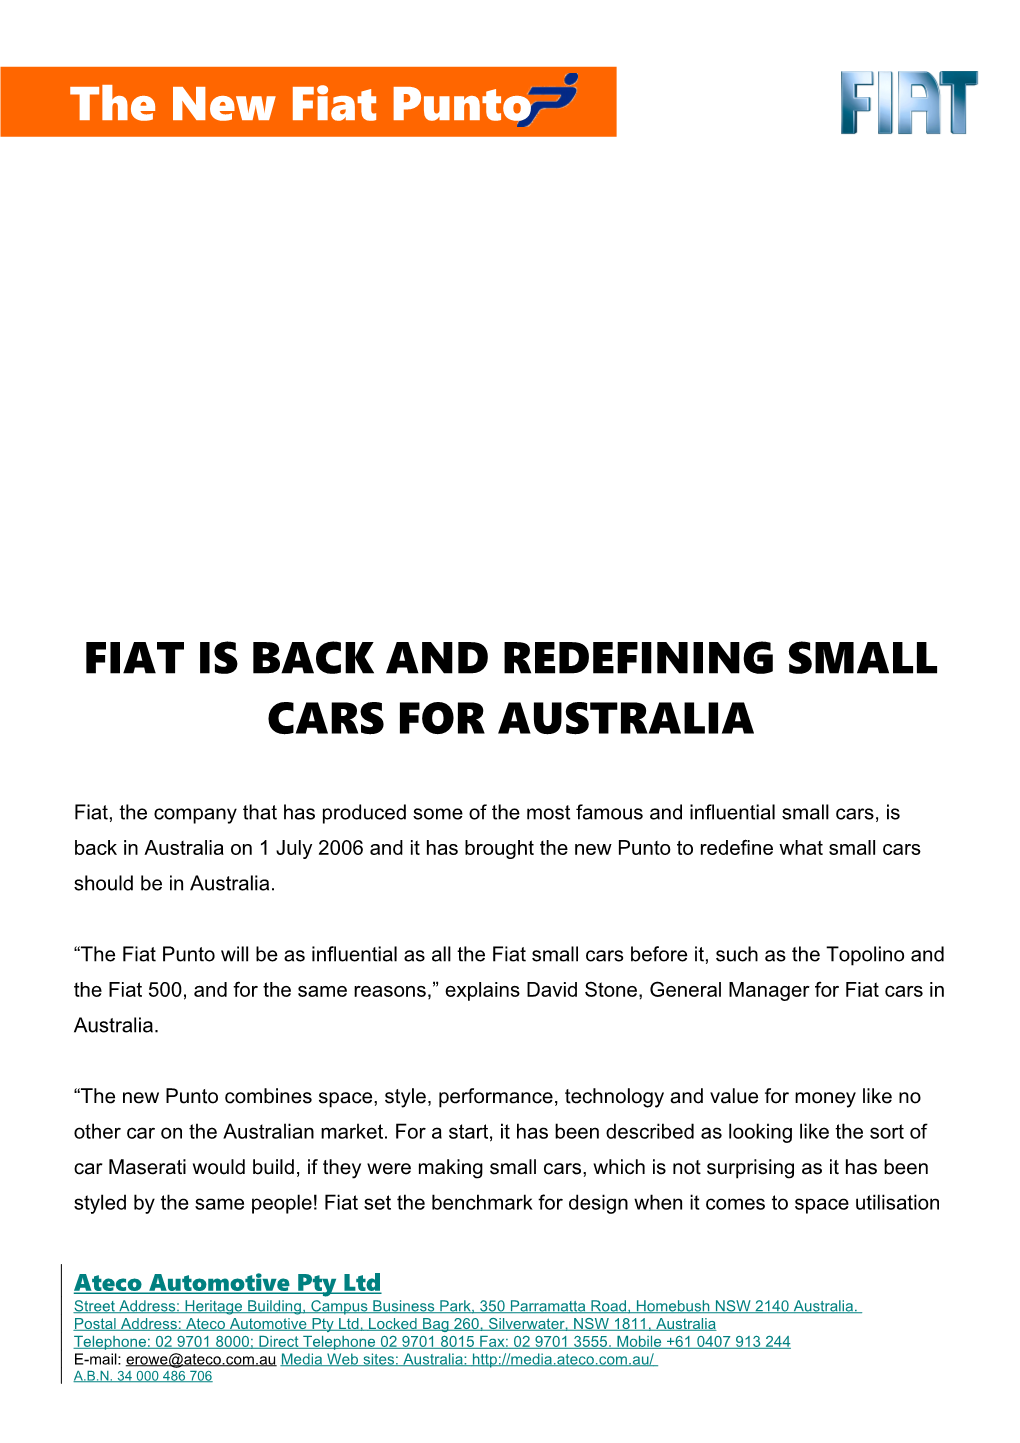 Fiat Is Back and Redefining Small Cars for Australia